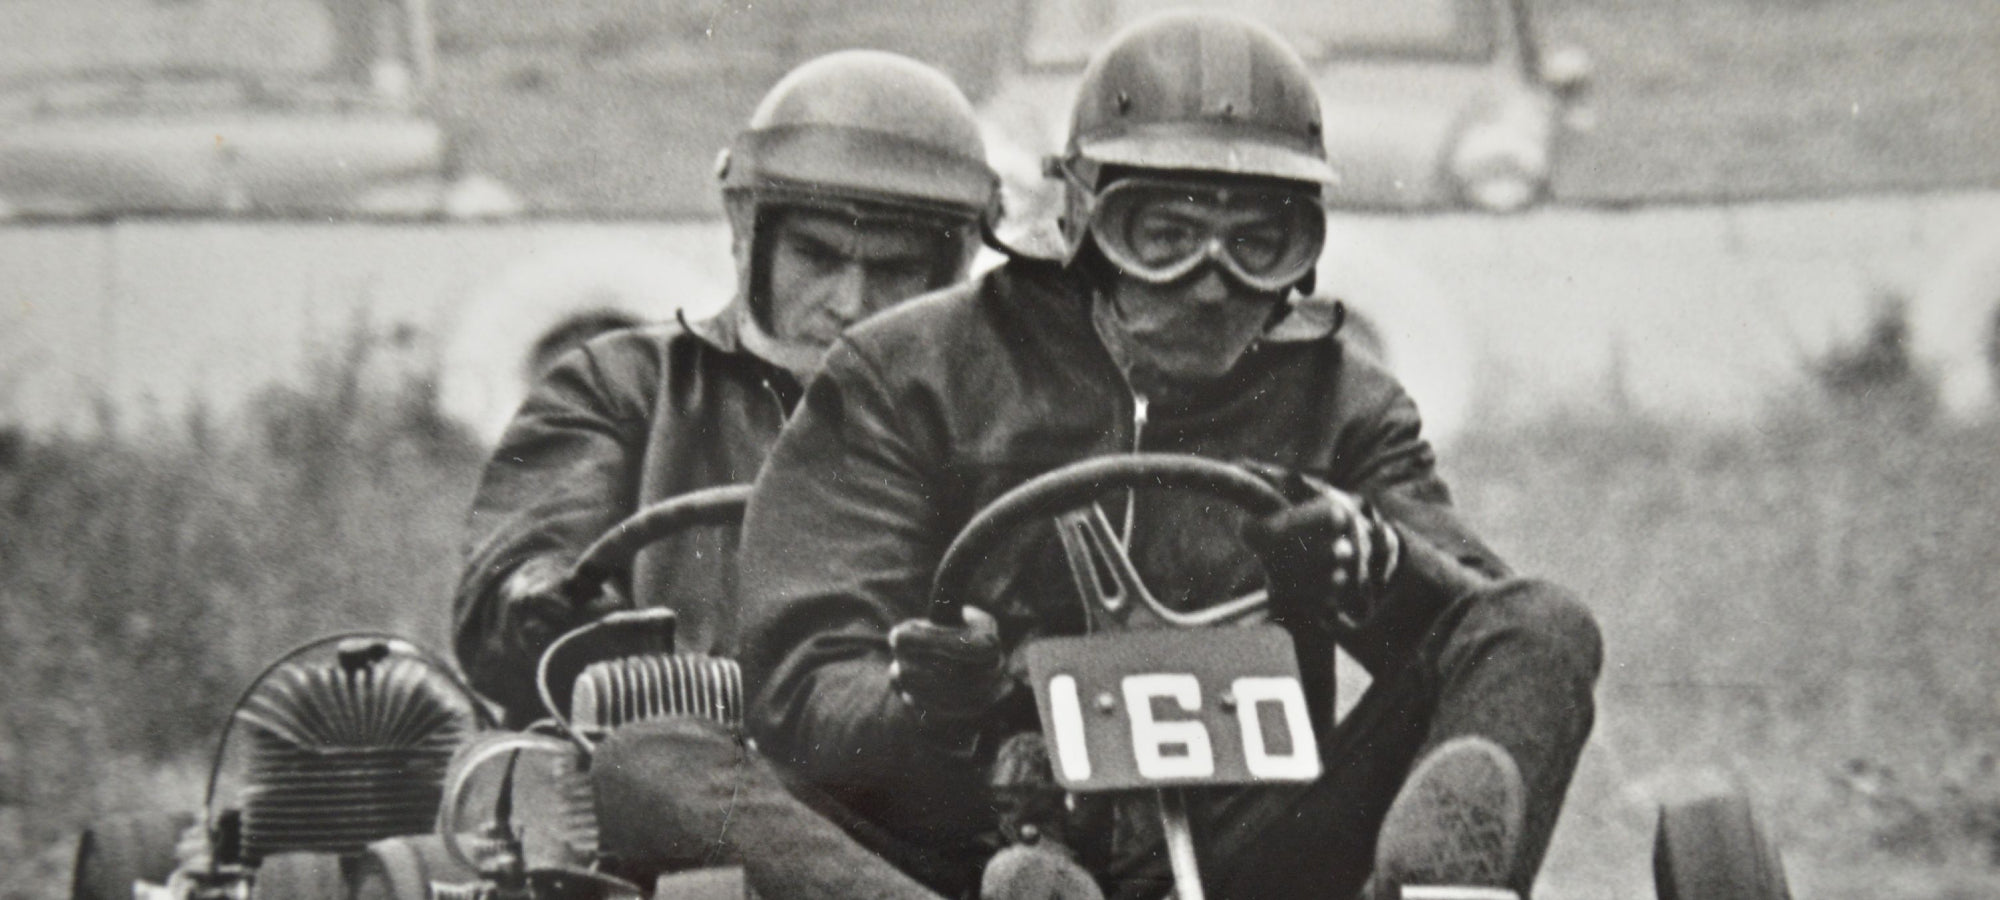 The History of Karting, The Motorsports Proving Grounds